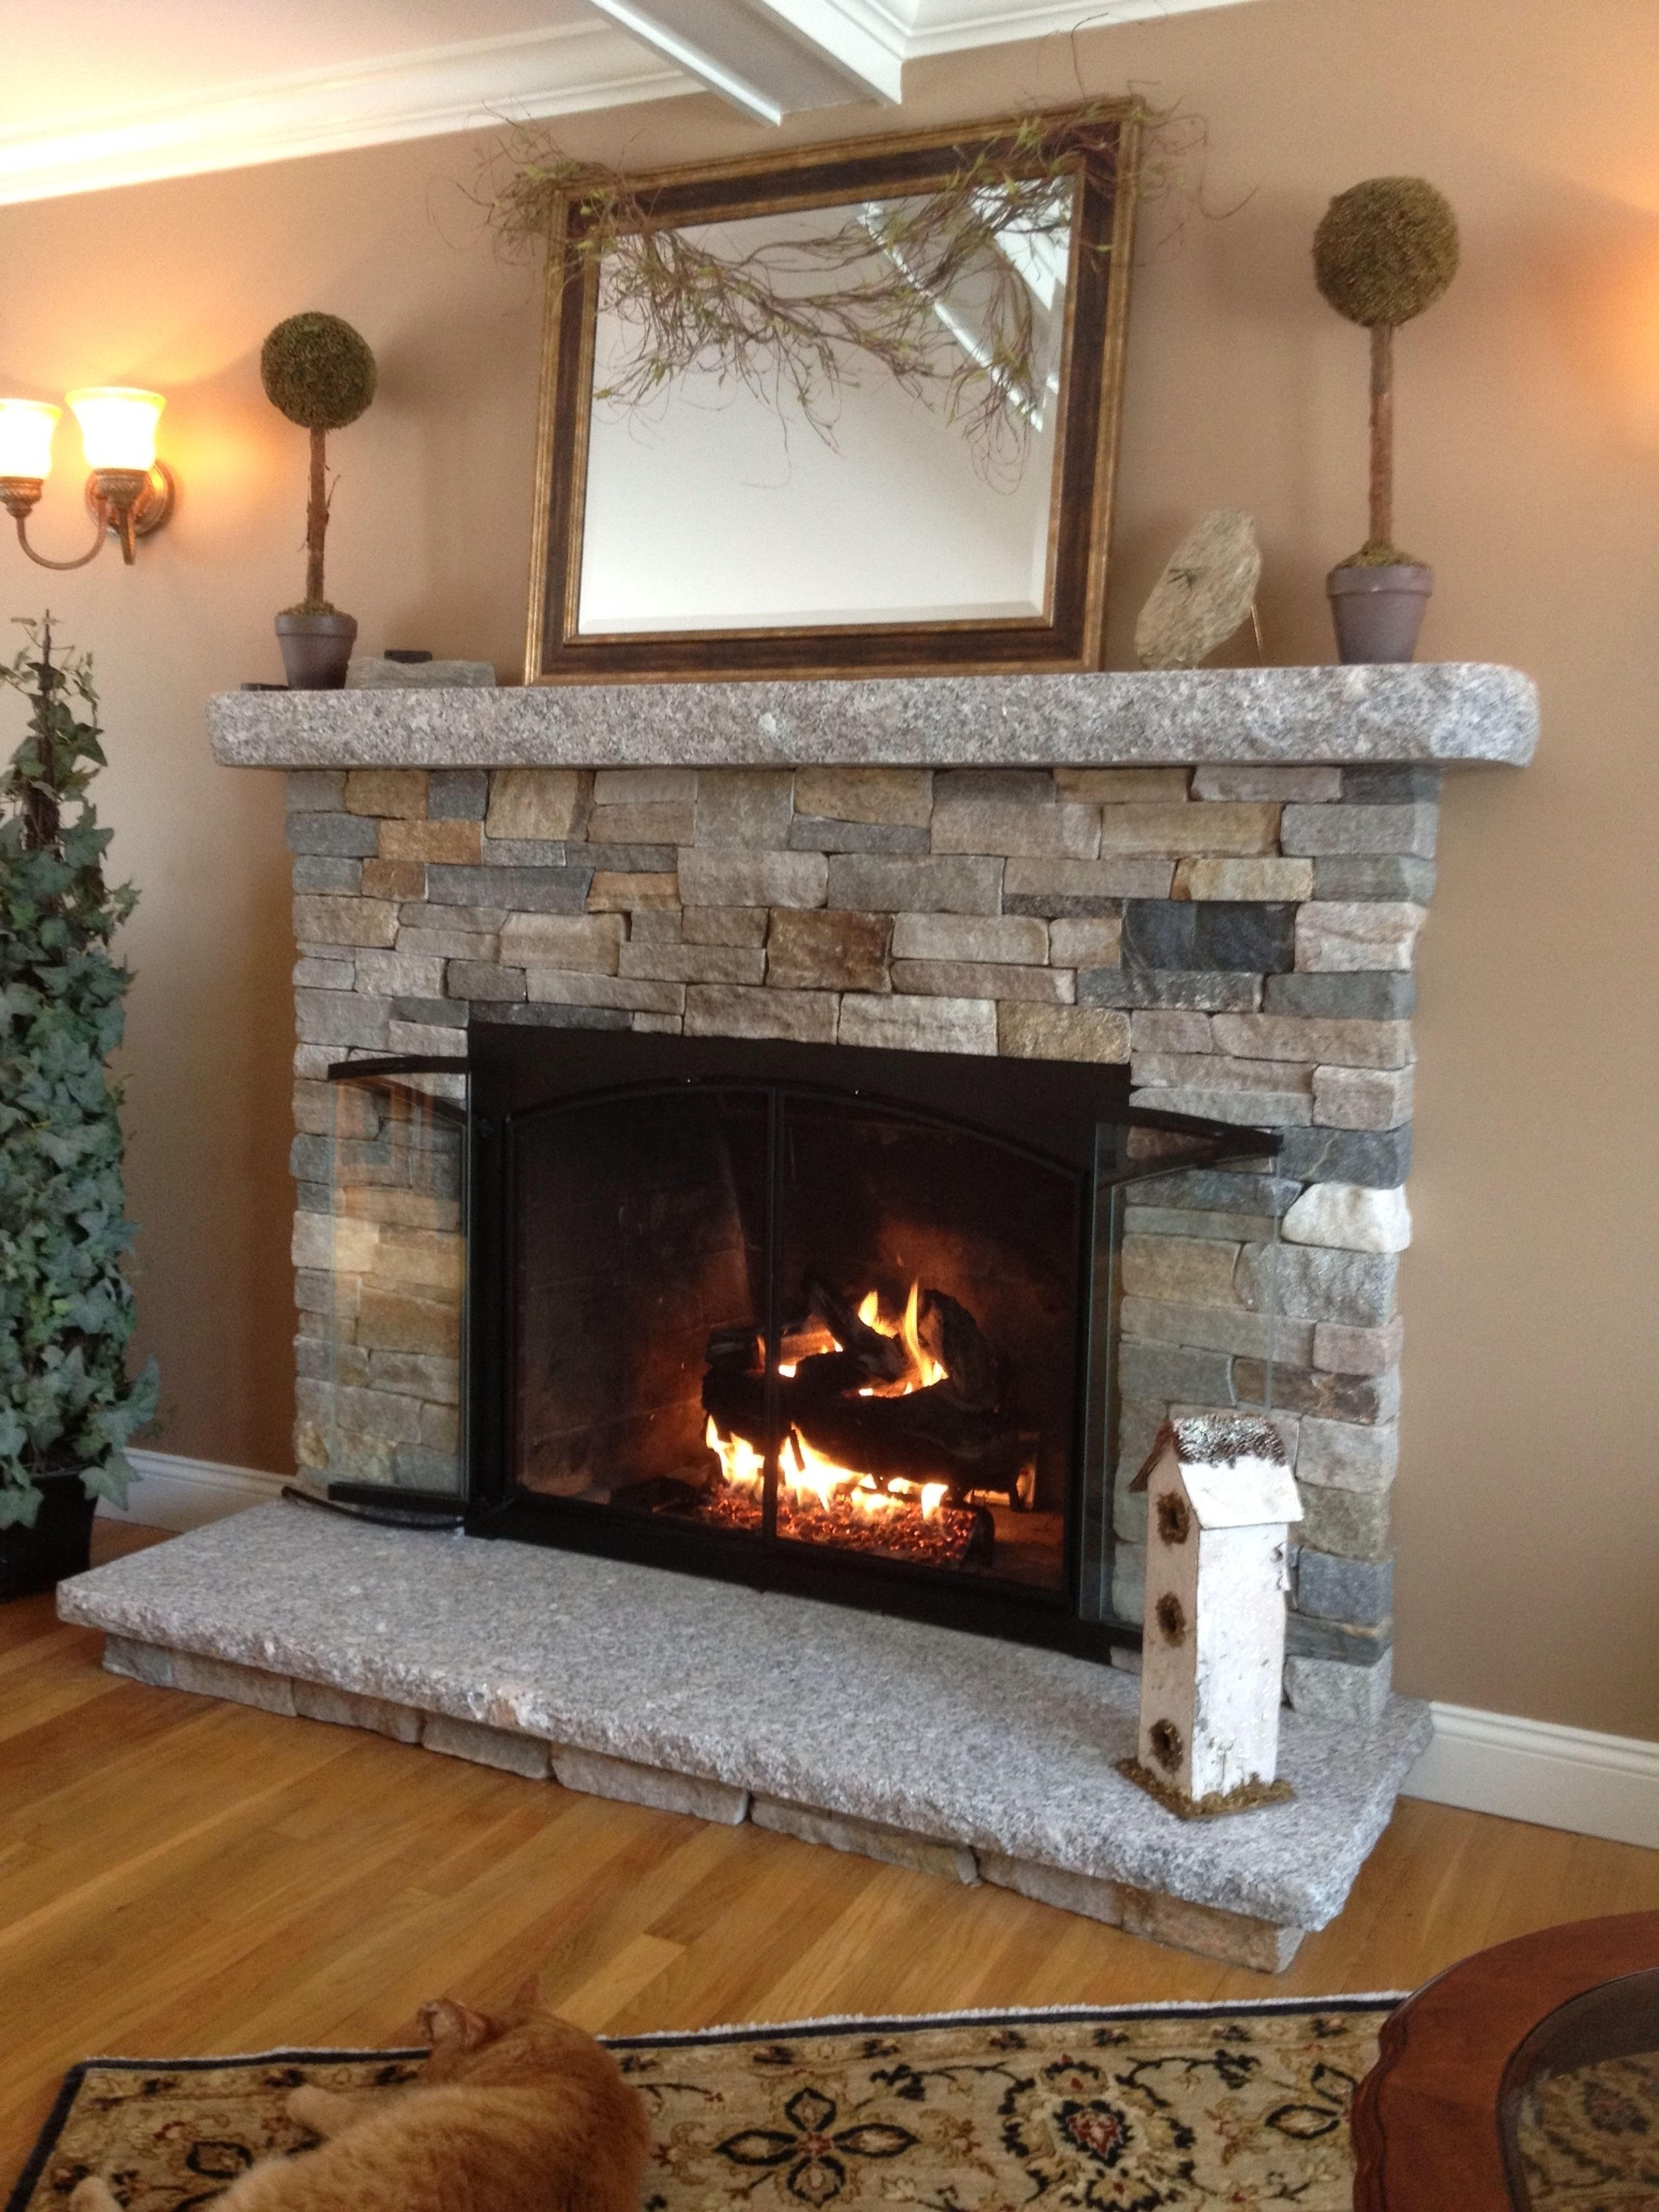 Arnold Stove and Fireplace Best Of Fireplace Stone Tile Charming Fireplace